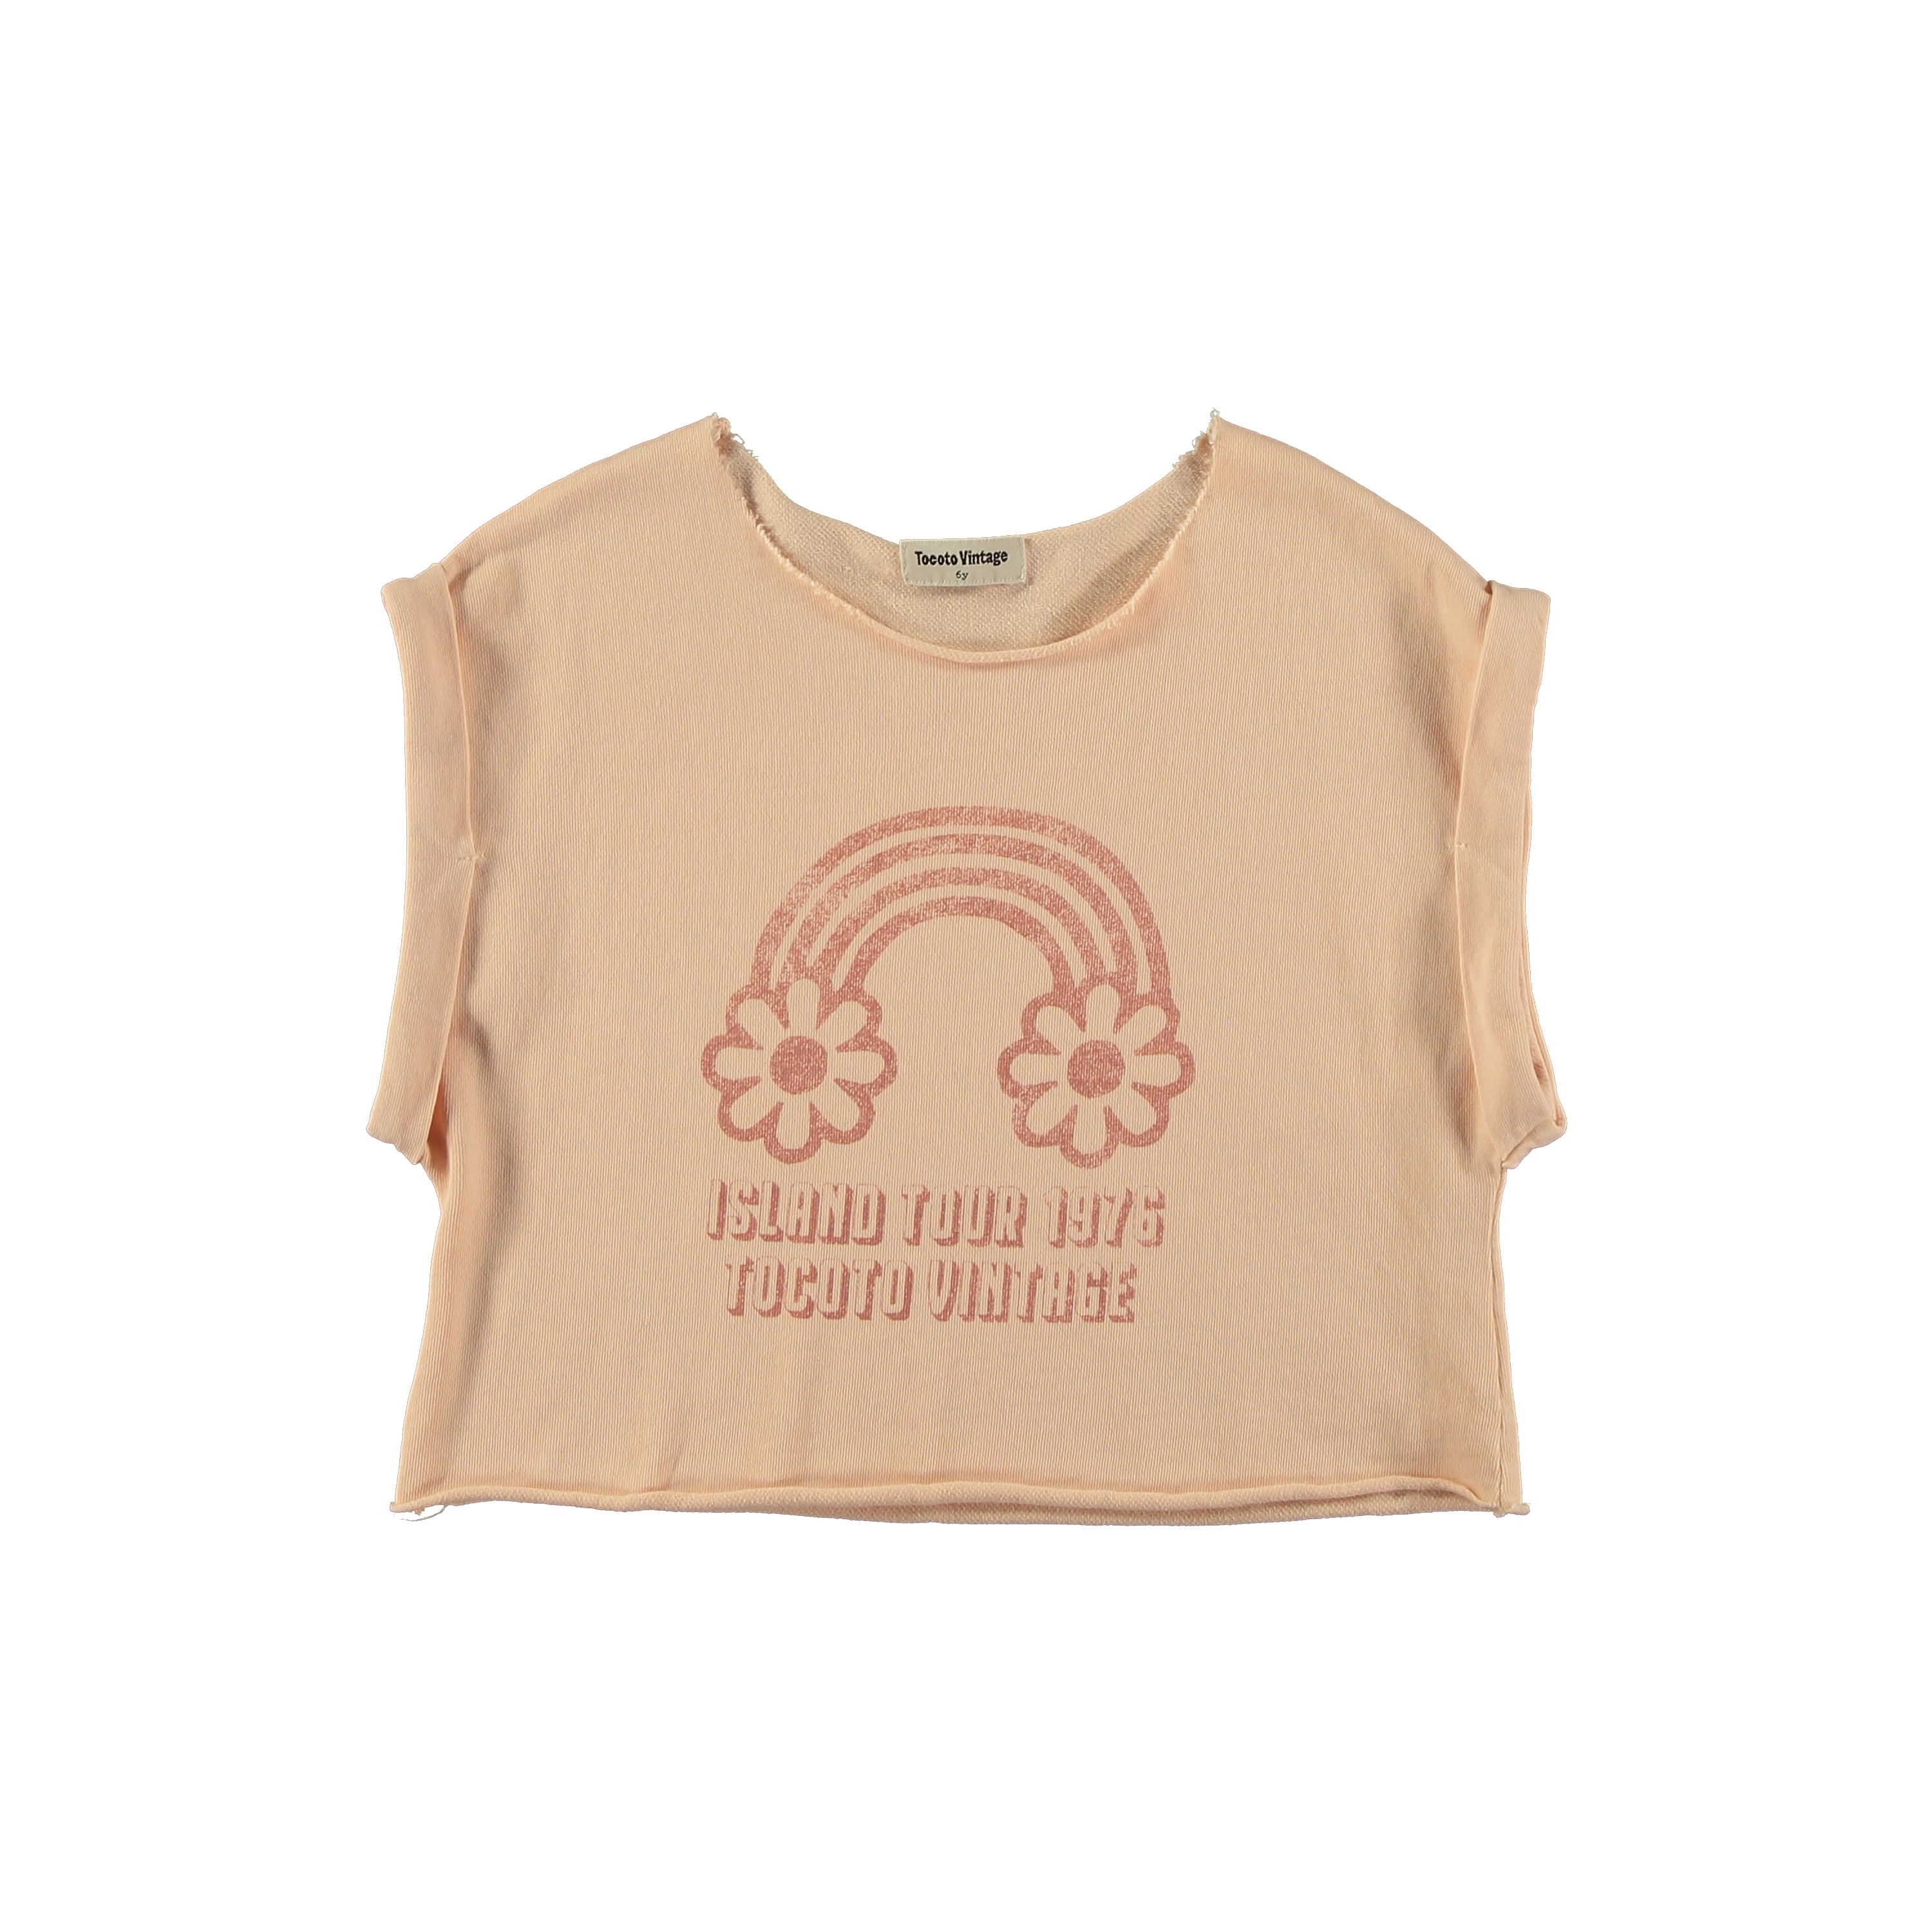 Tocoto Vintage - island tour printed pluche top - pink